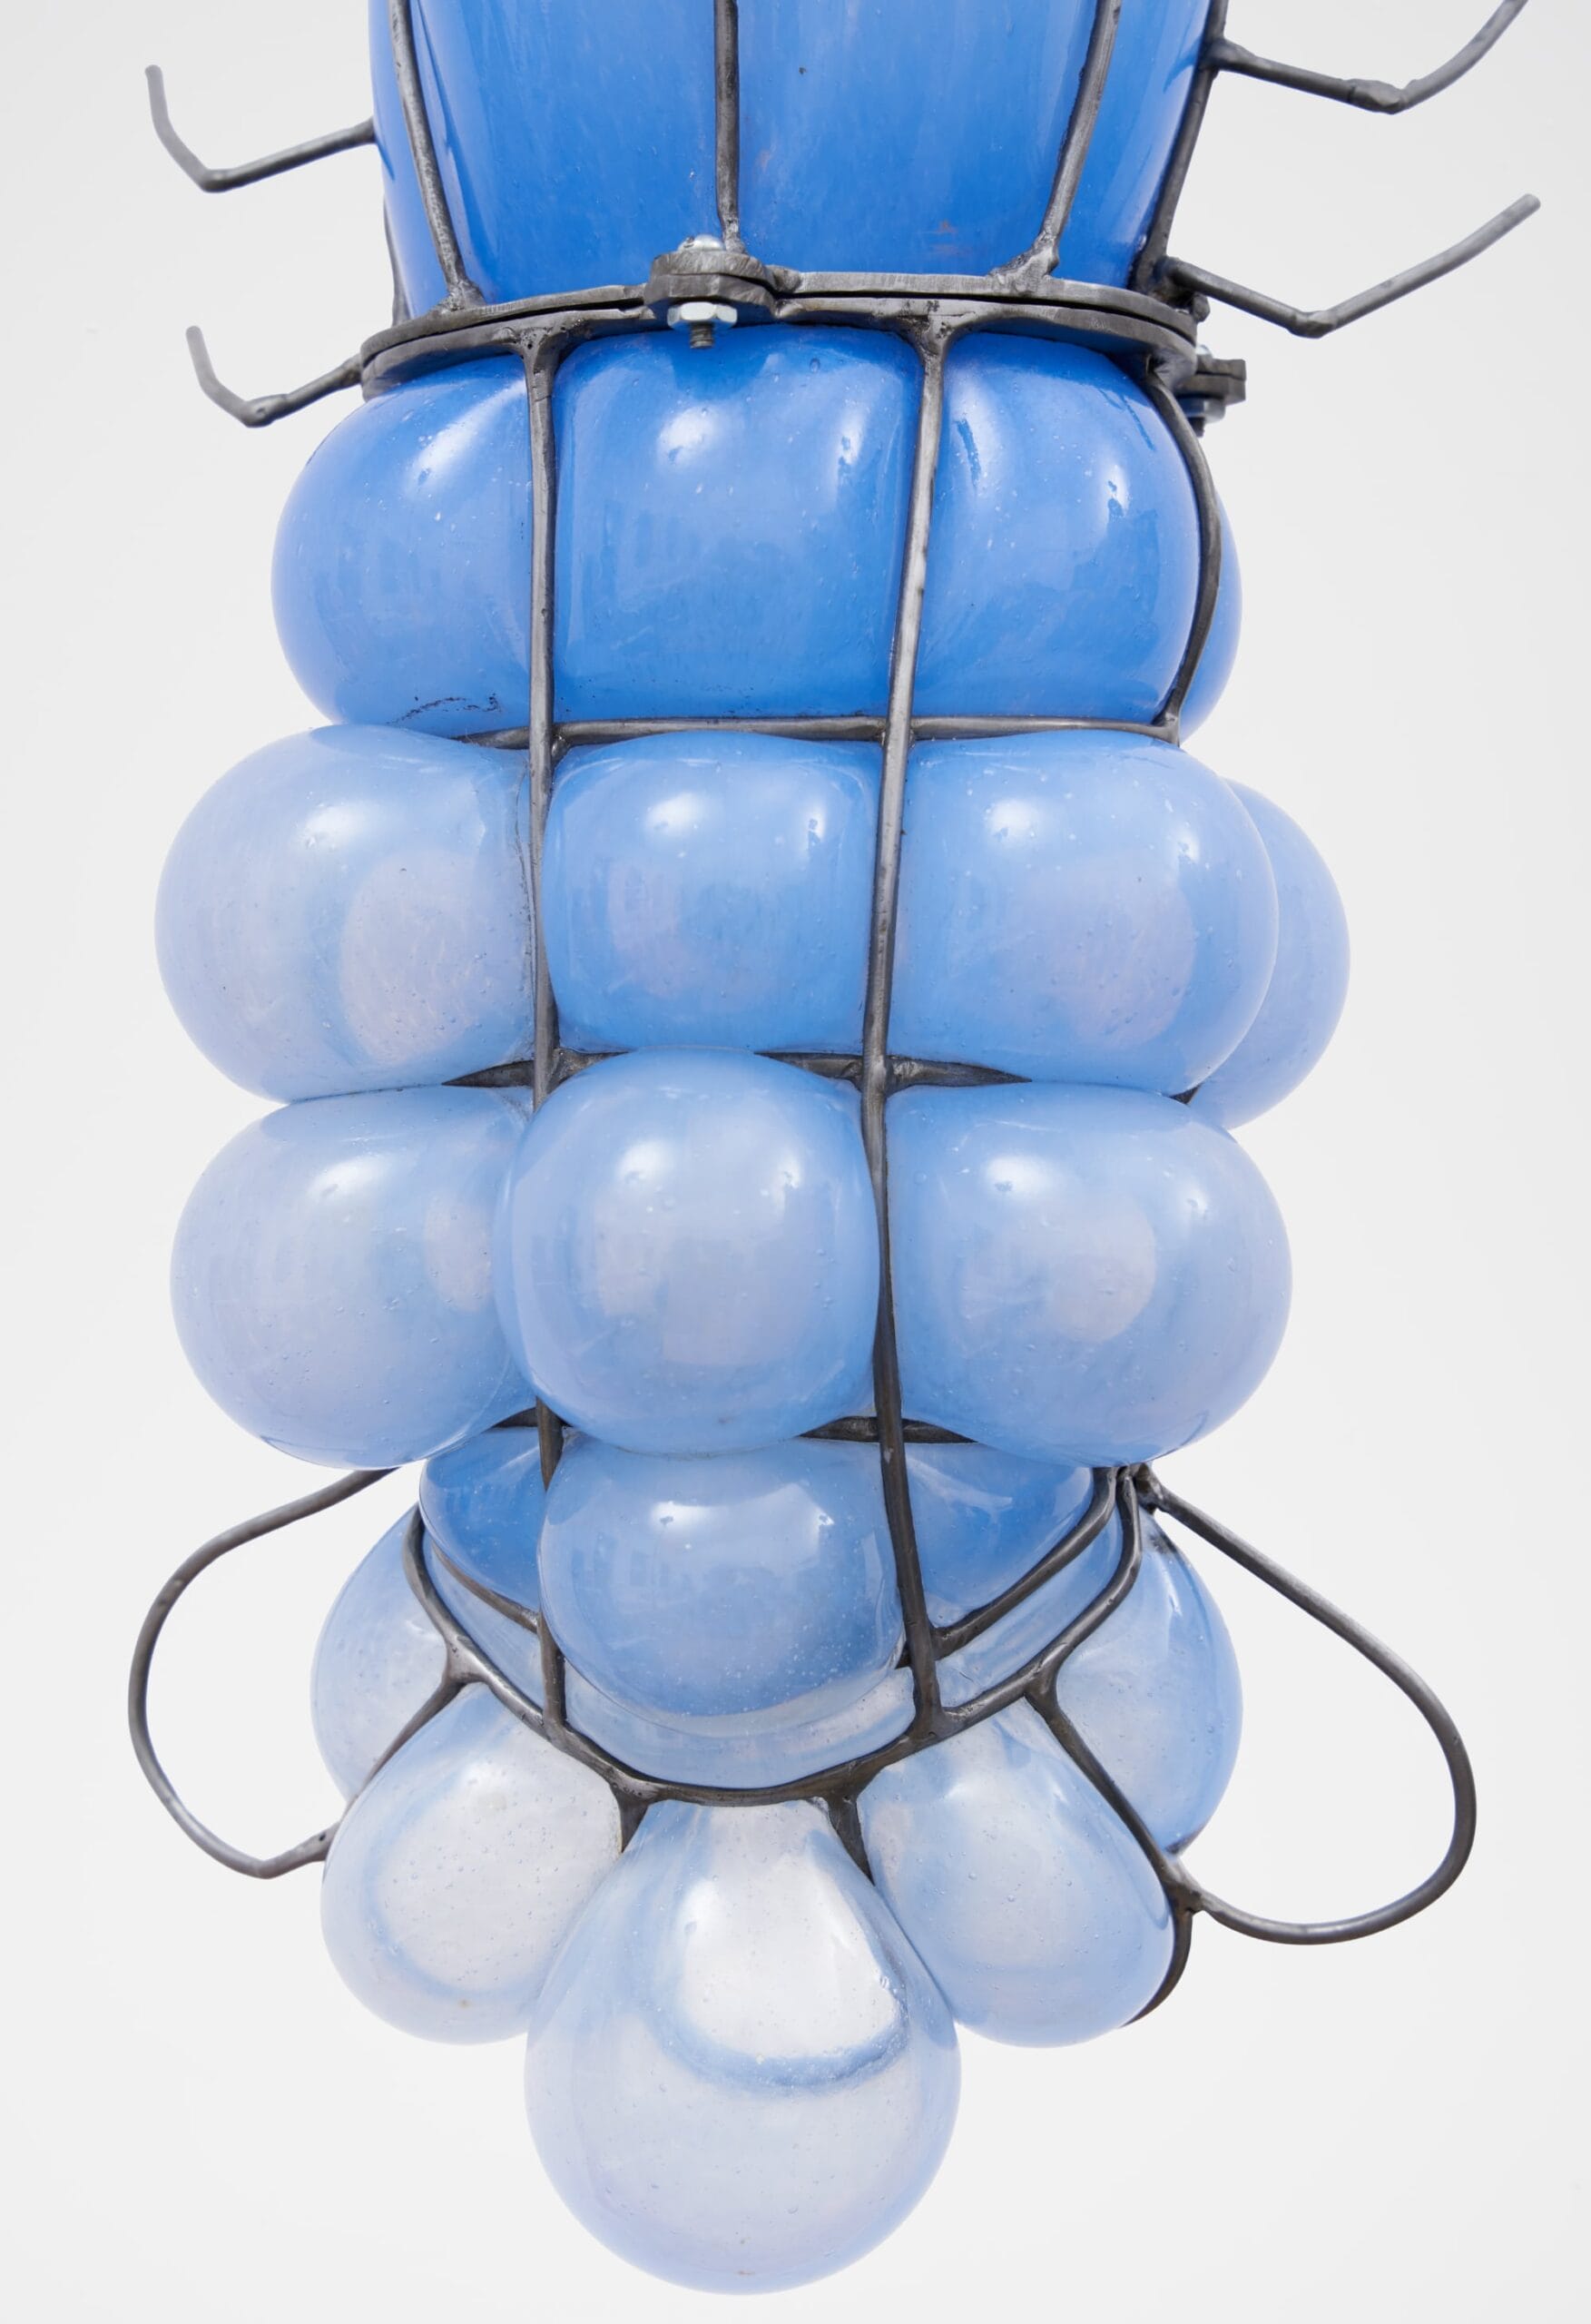 a close up image of the bottom of a glass blown pendant lamp that bubbles inside steel armature and appears like a blue lobster